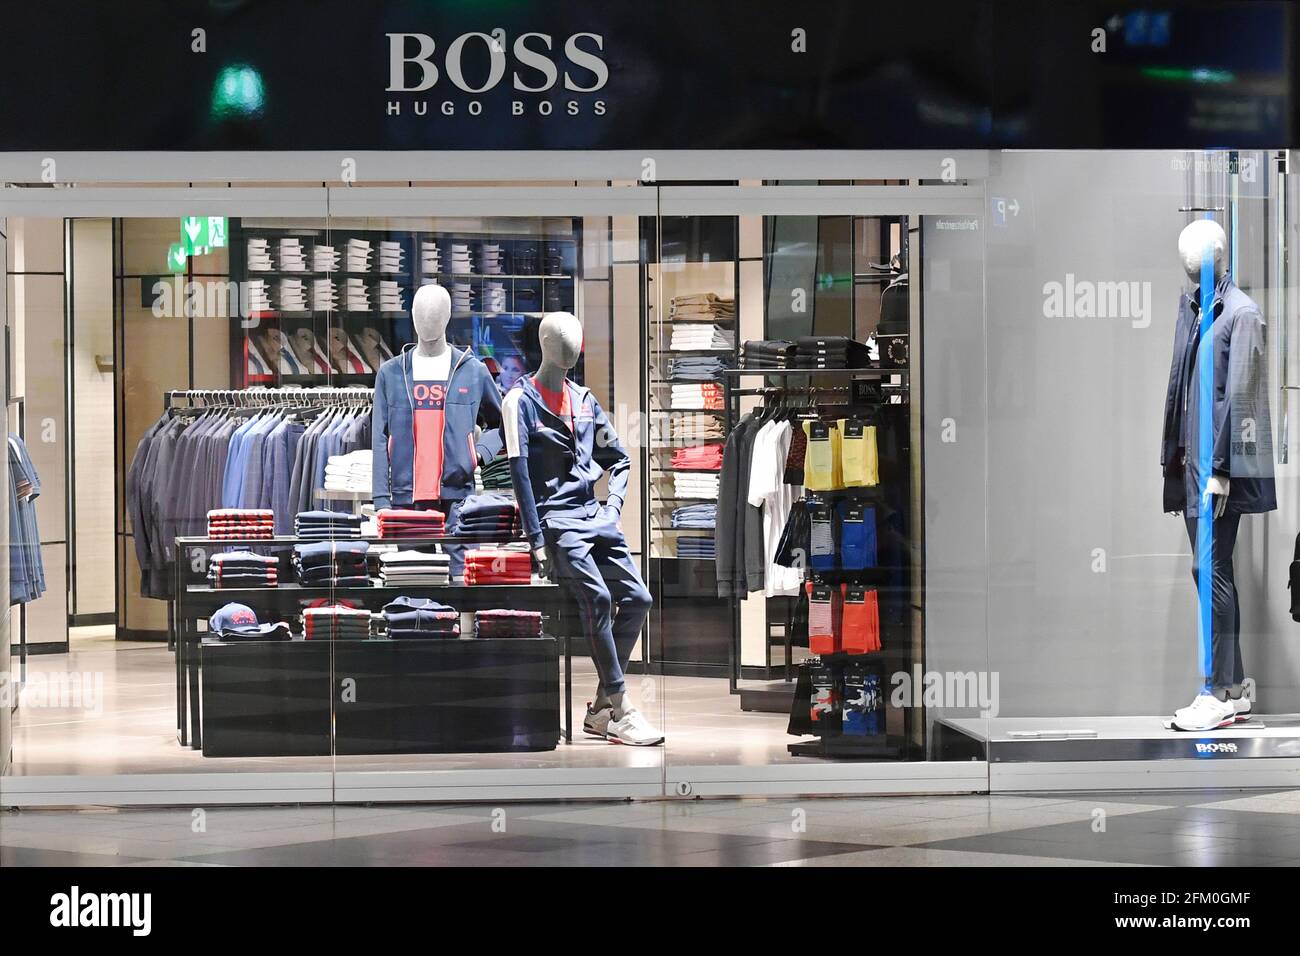 Fashion retailer in crisis - Hugo Boss is making losses due to Corona.  Archive photo; Topic picture coronavirus pandemic on April 15, 2020. Franz  Josef Strauss Airport Munich. Munich Airport. Closed Hugo